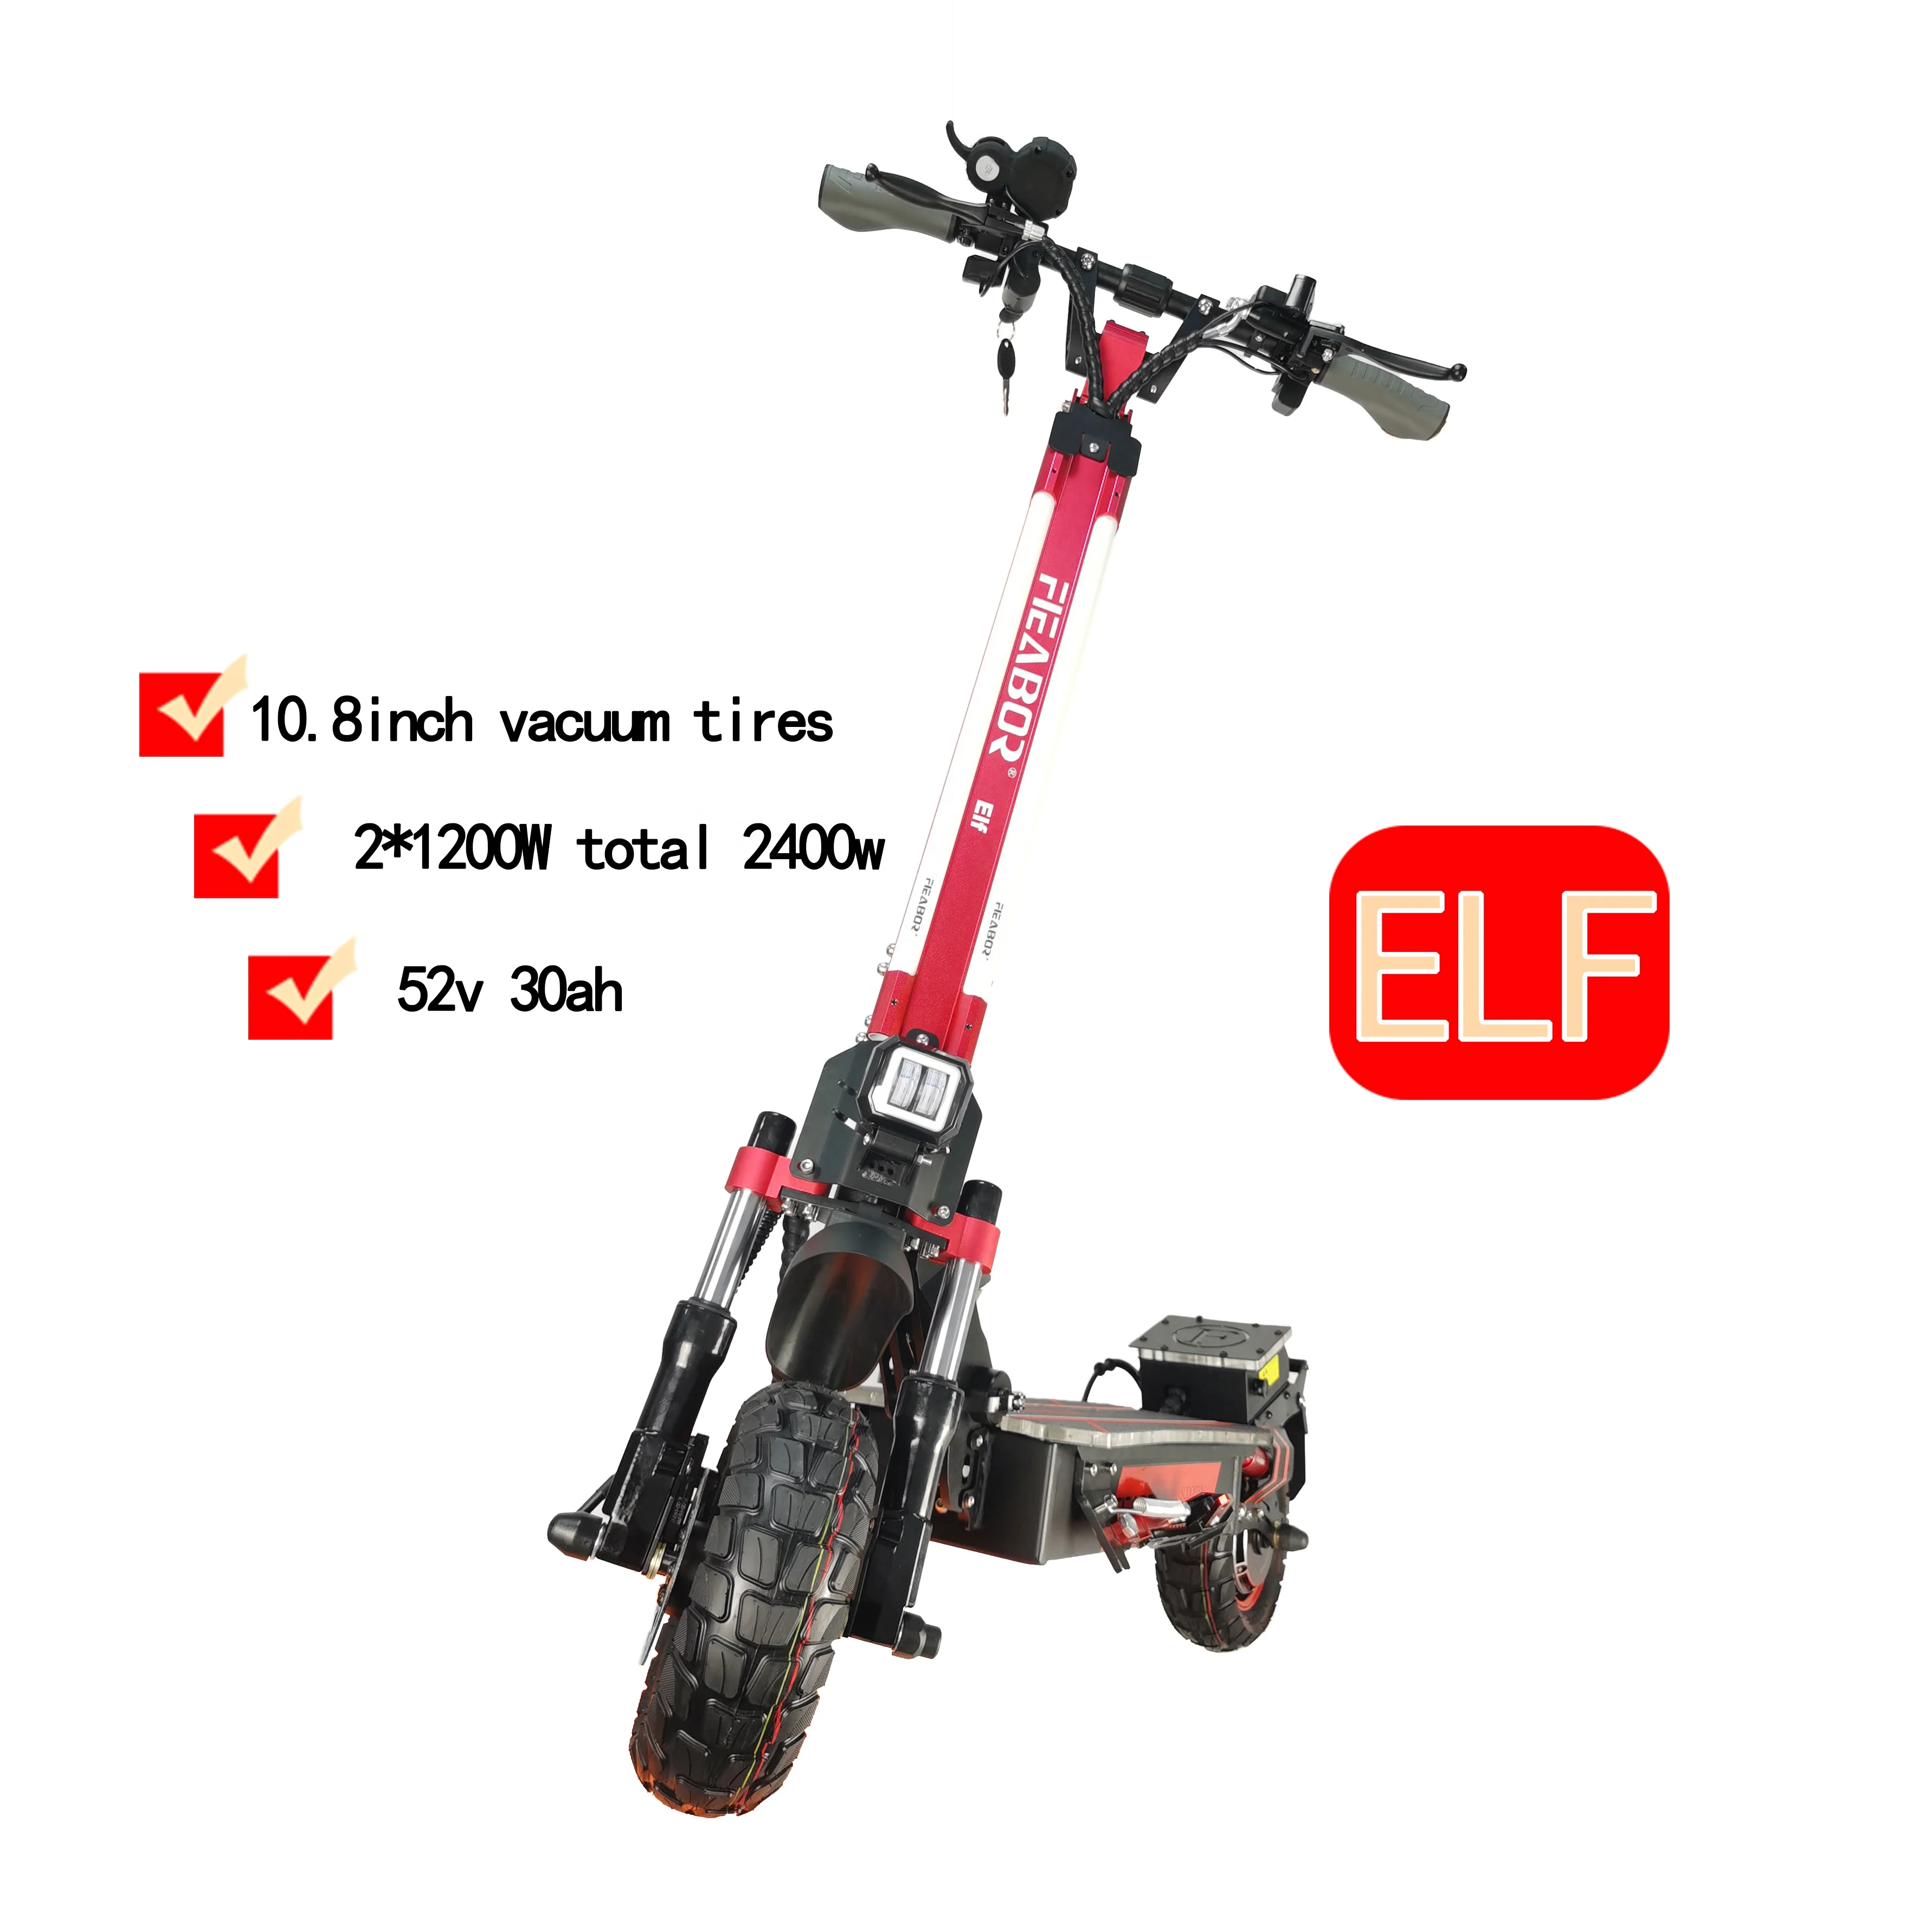 

New Design 2021 52v Adult Scooter Dual Motor 2400W Electric Scooter Max Speed 65km/h